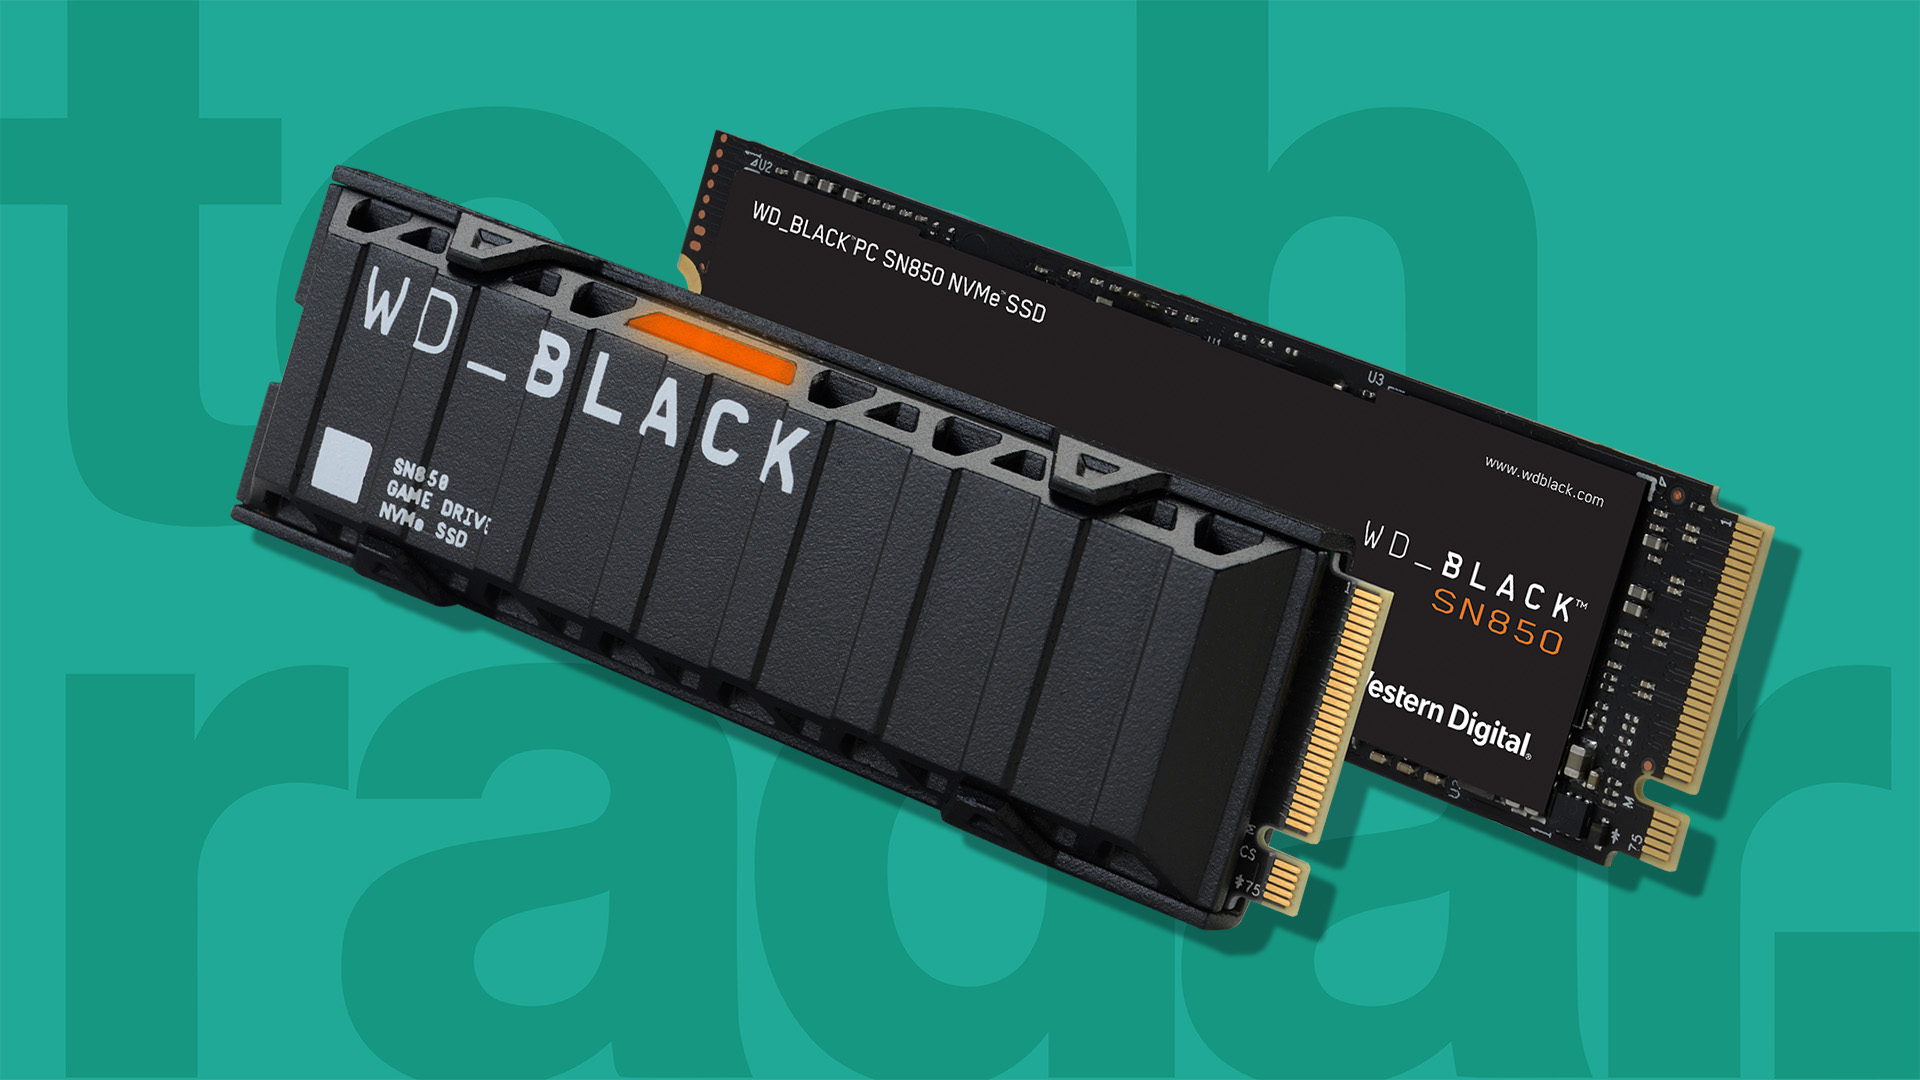 The best SSD for PS5, the WD Black SN850 SSD, on a colourful background